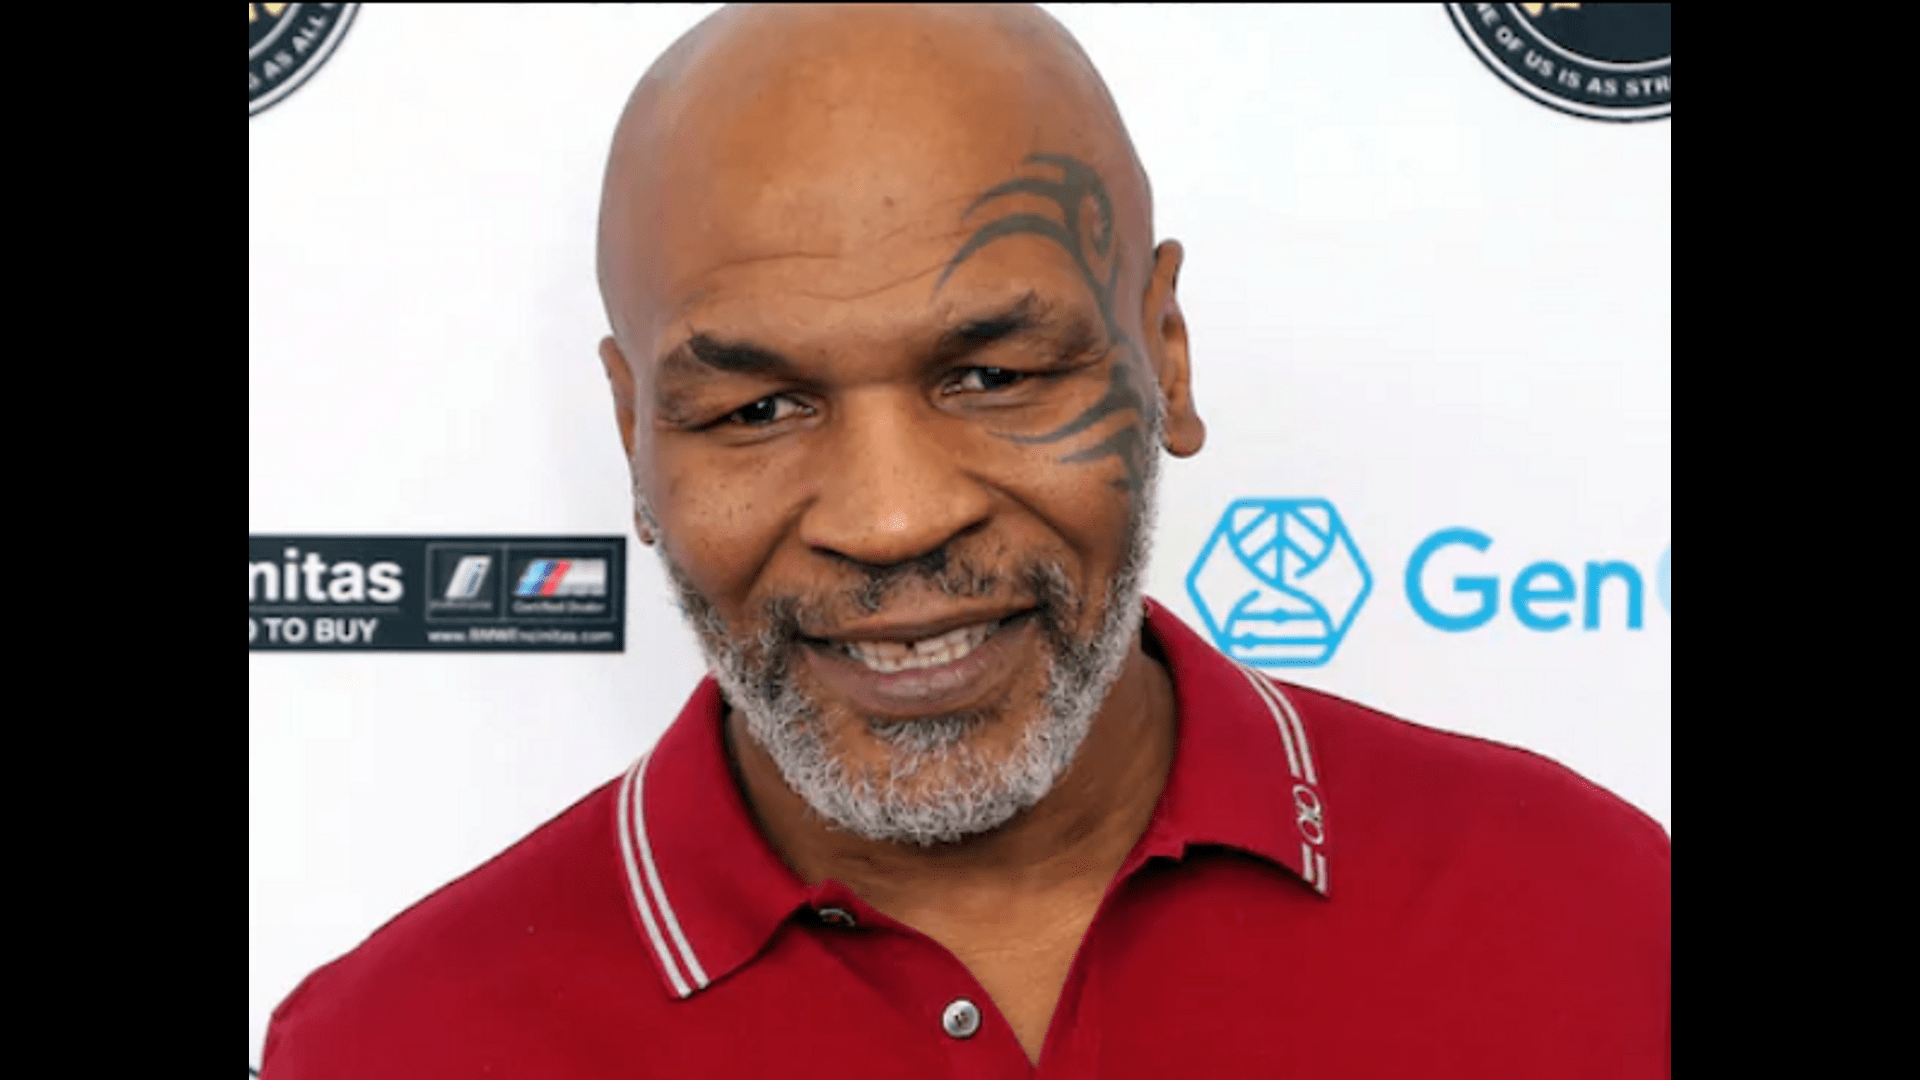 mike-tyson-hit-an-annoying-passenger-on-the-plane